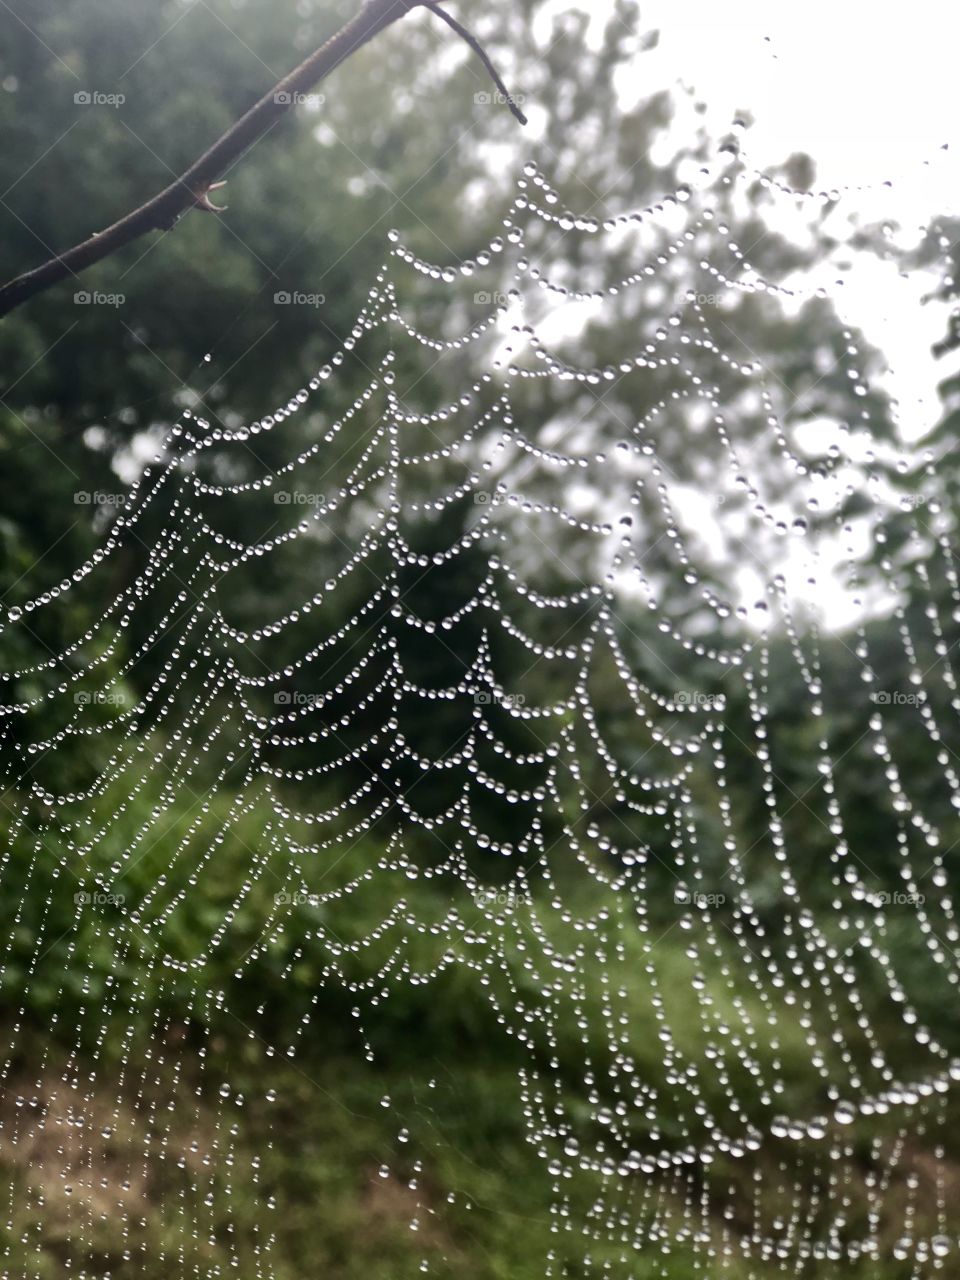 Spider web on a rainy day